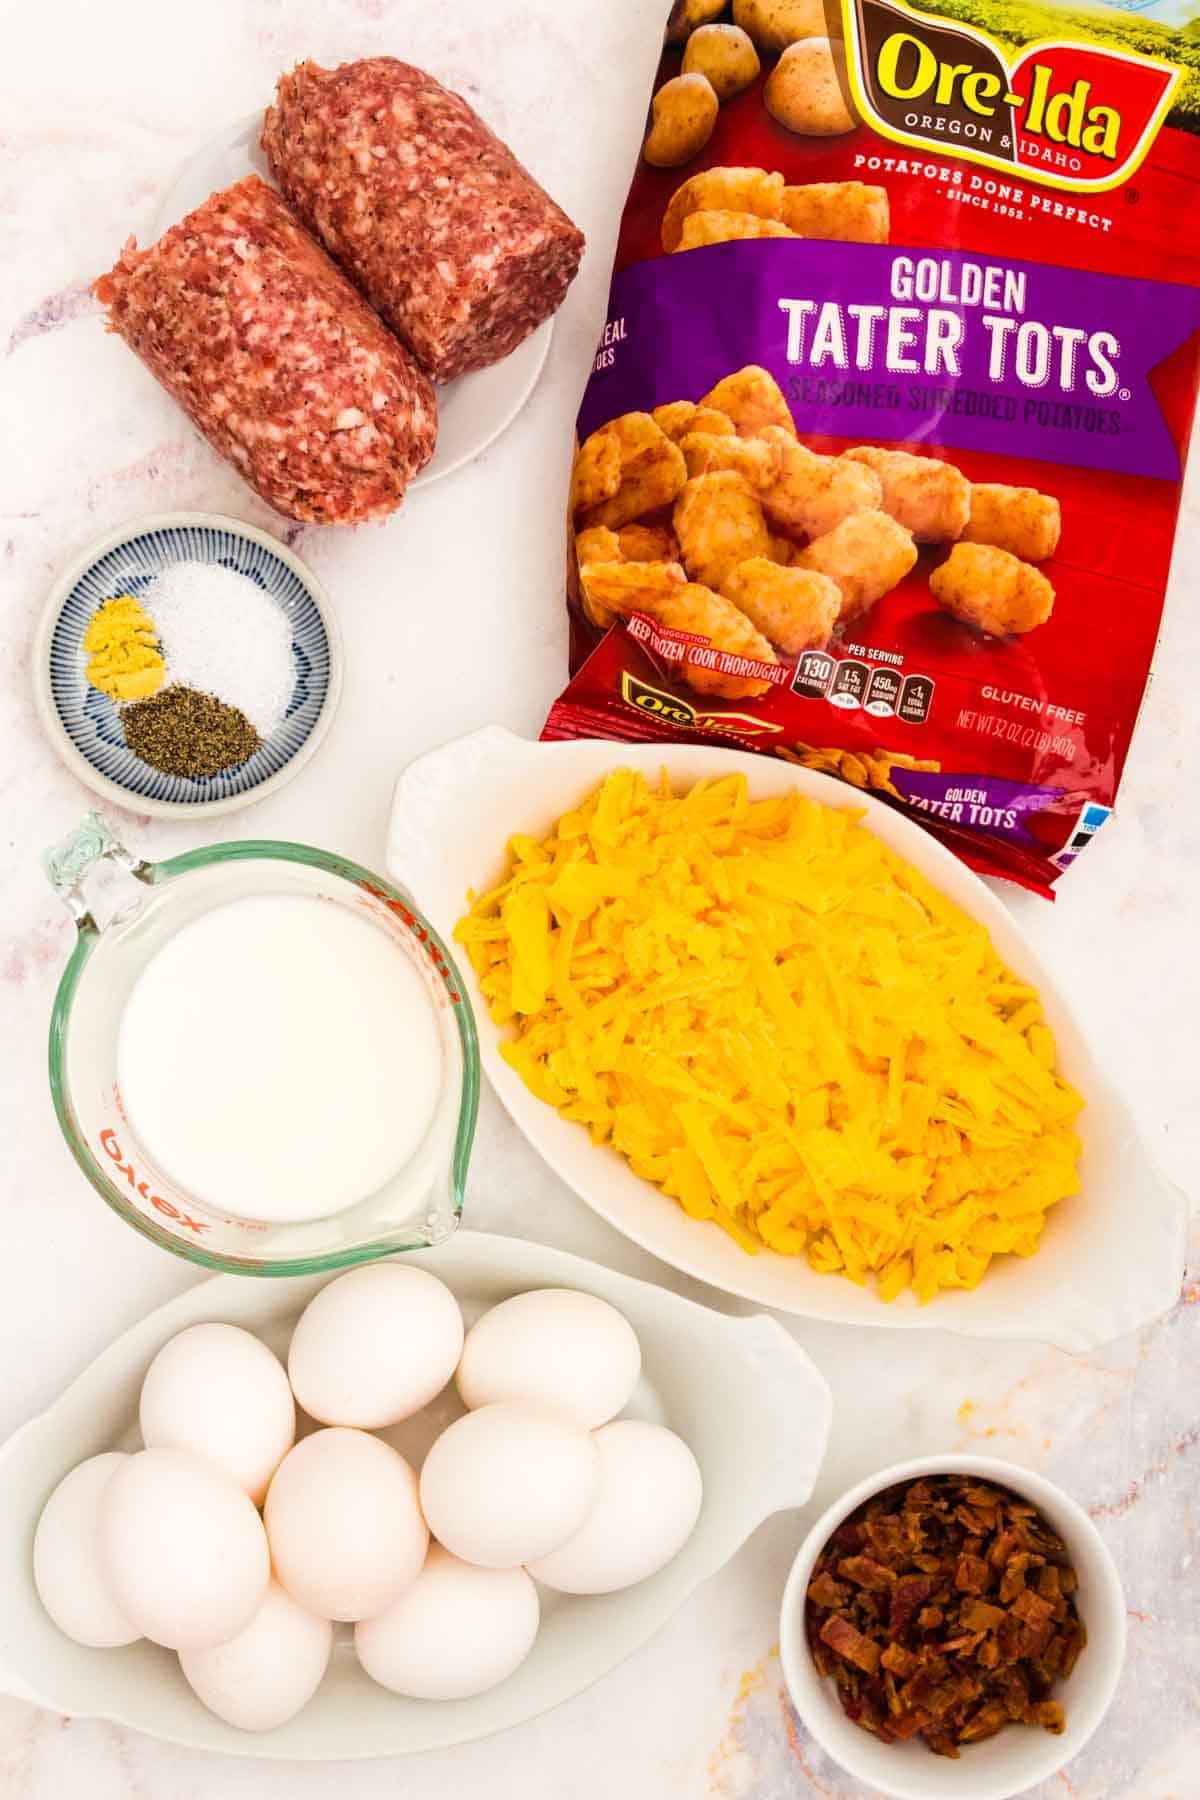 Ingredients for tater tot breakfast casserole are shown including shredded cheese, frozen tater tots, spices, eggs, sausage, and bacon.